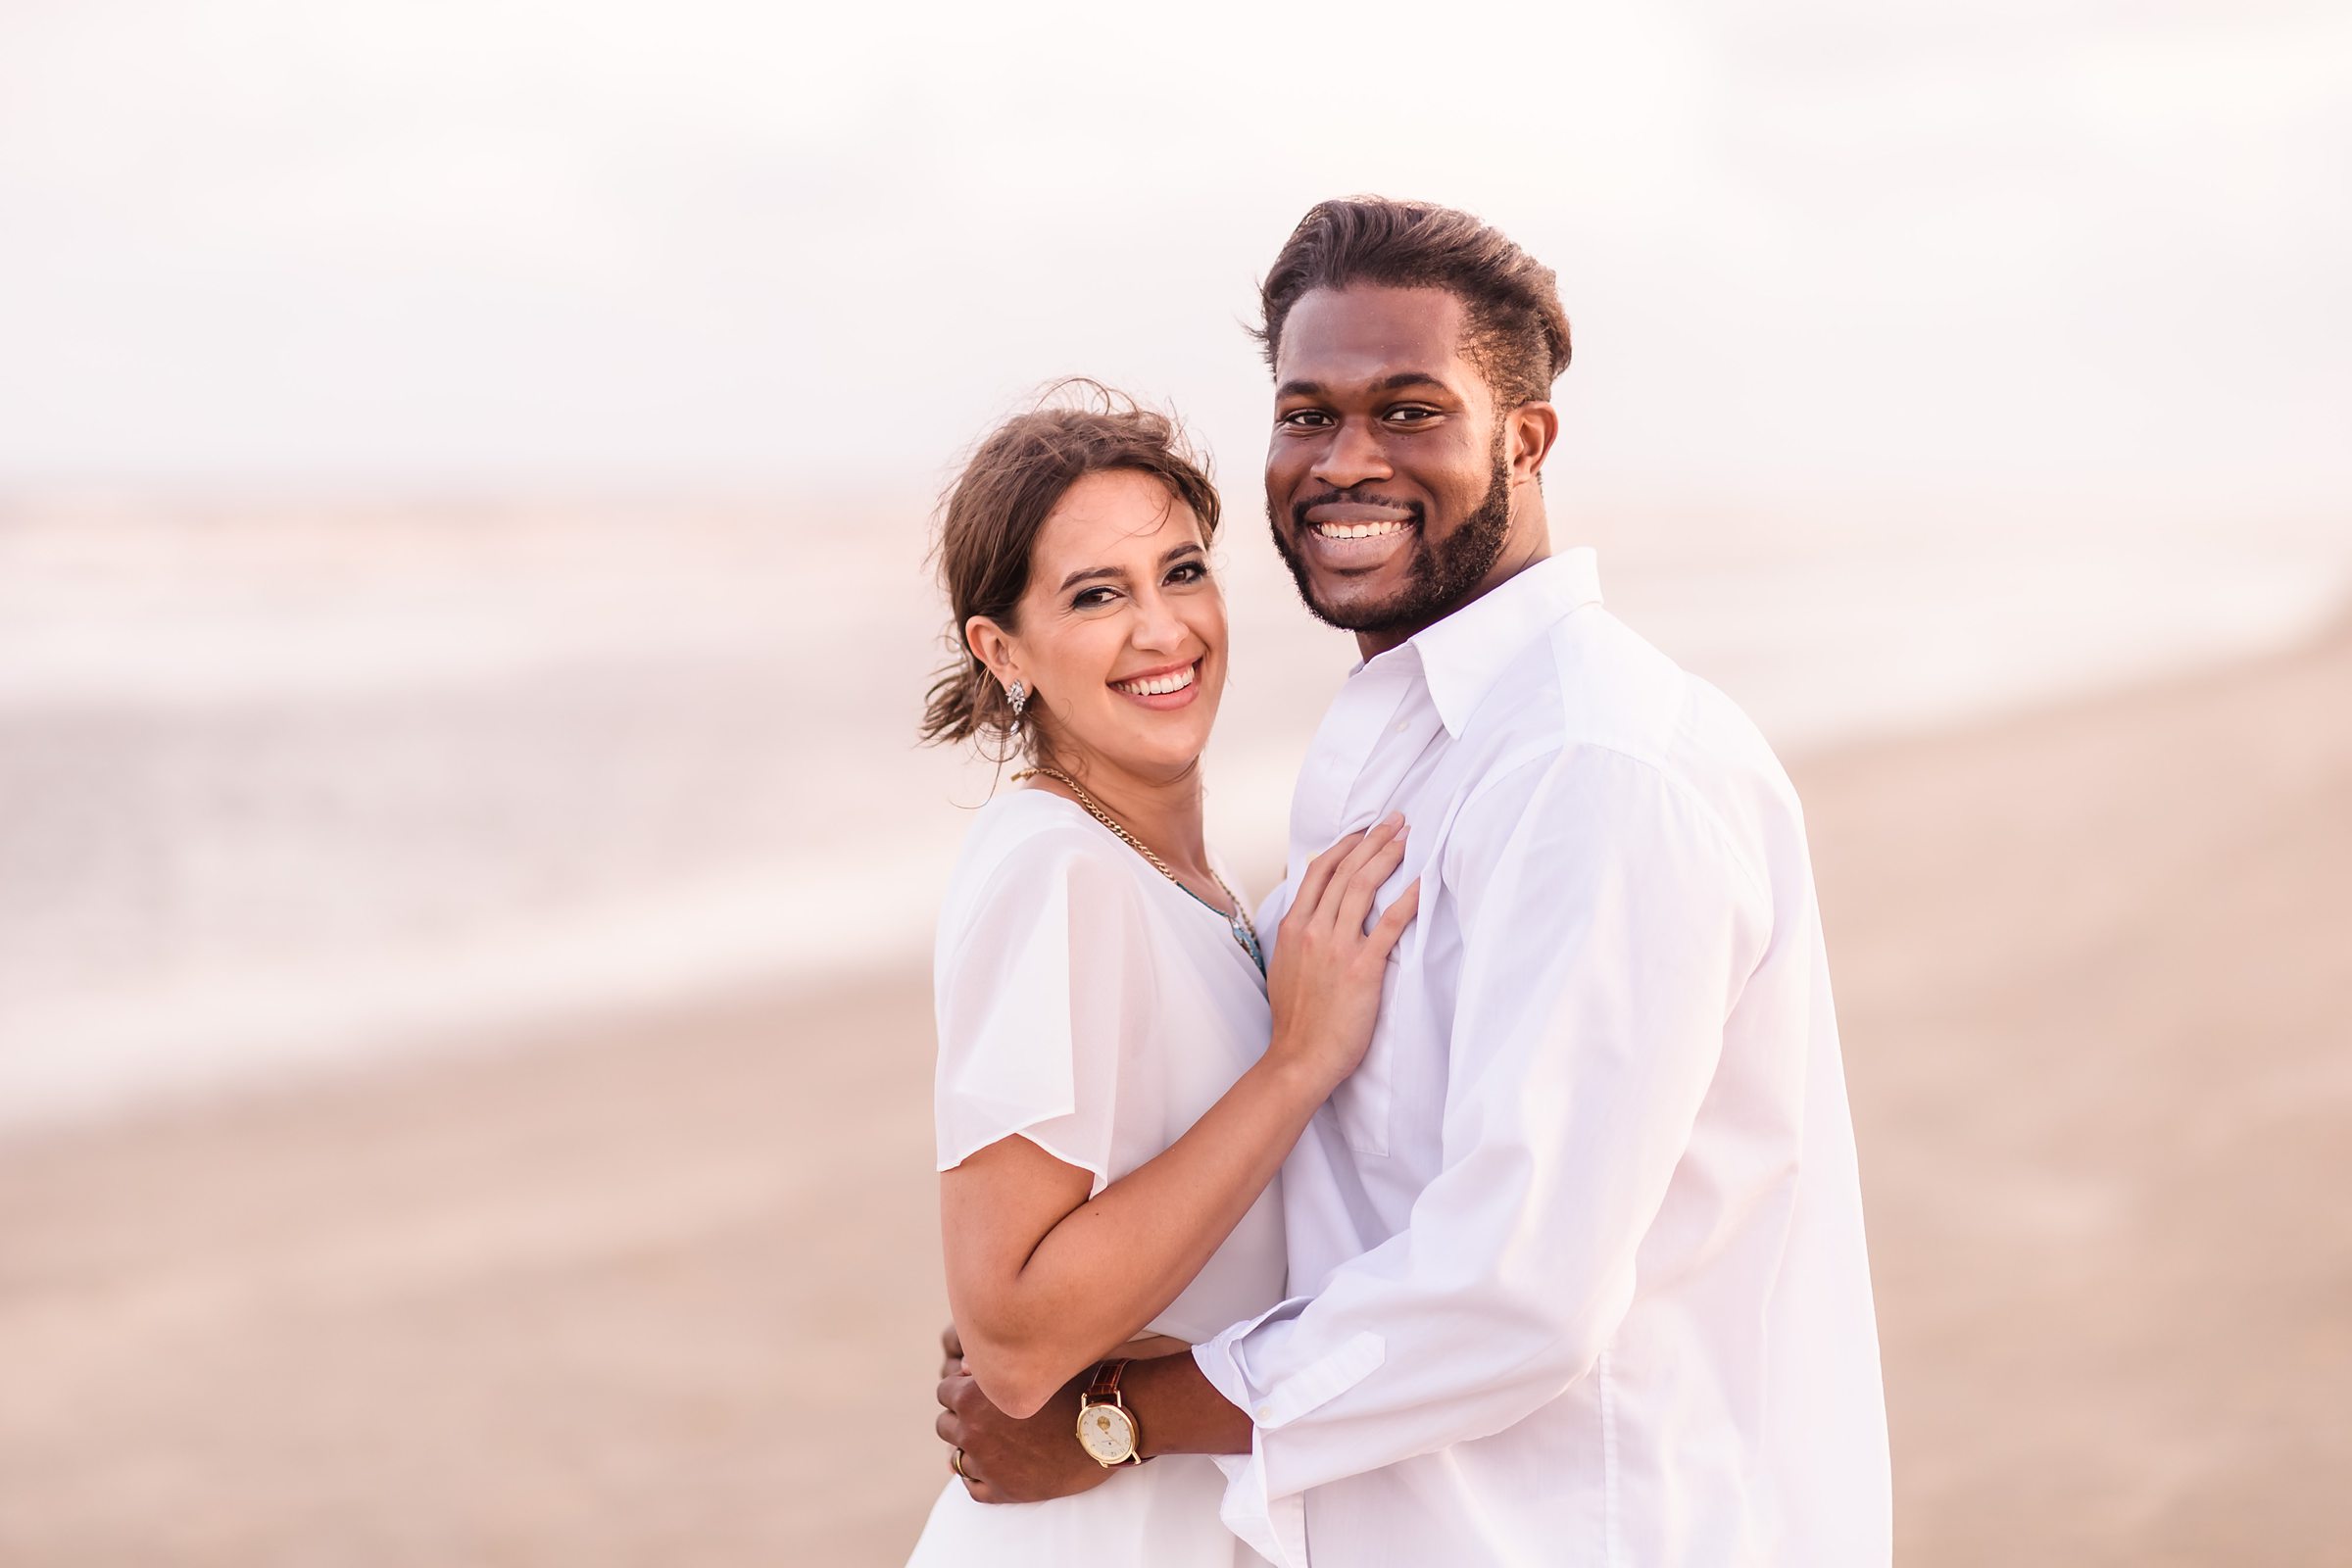 Couple embrace during their session at Galveston Beach in Texas.